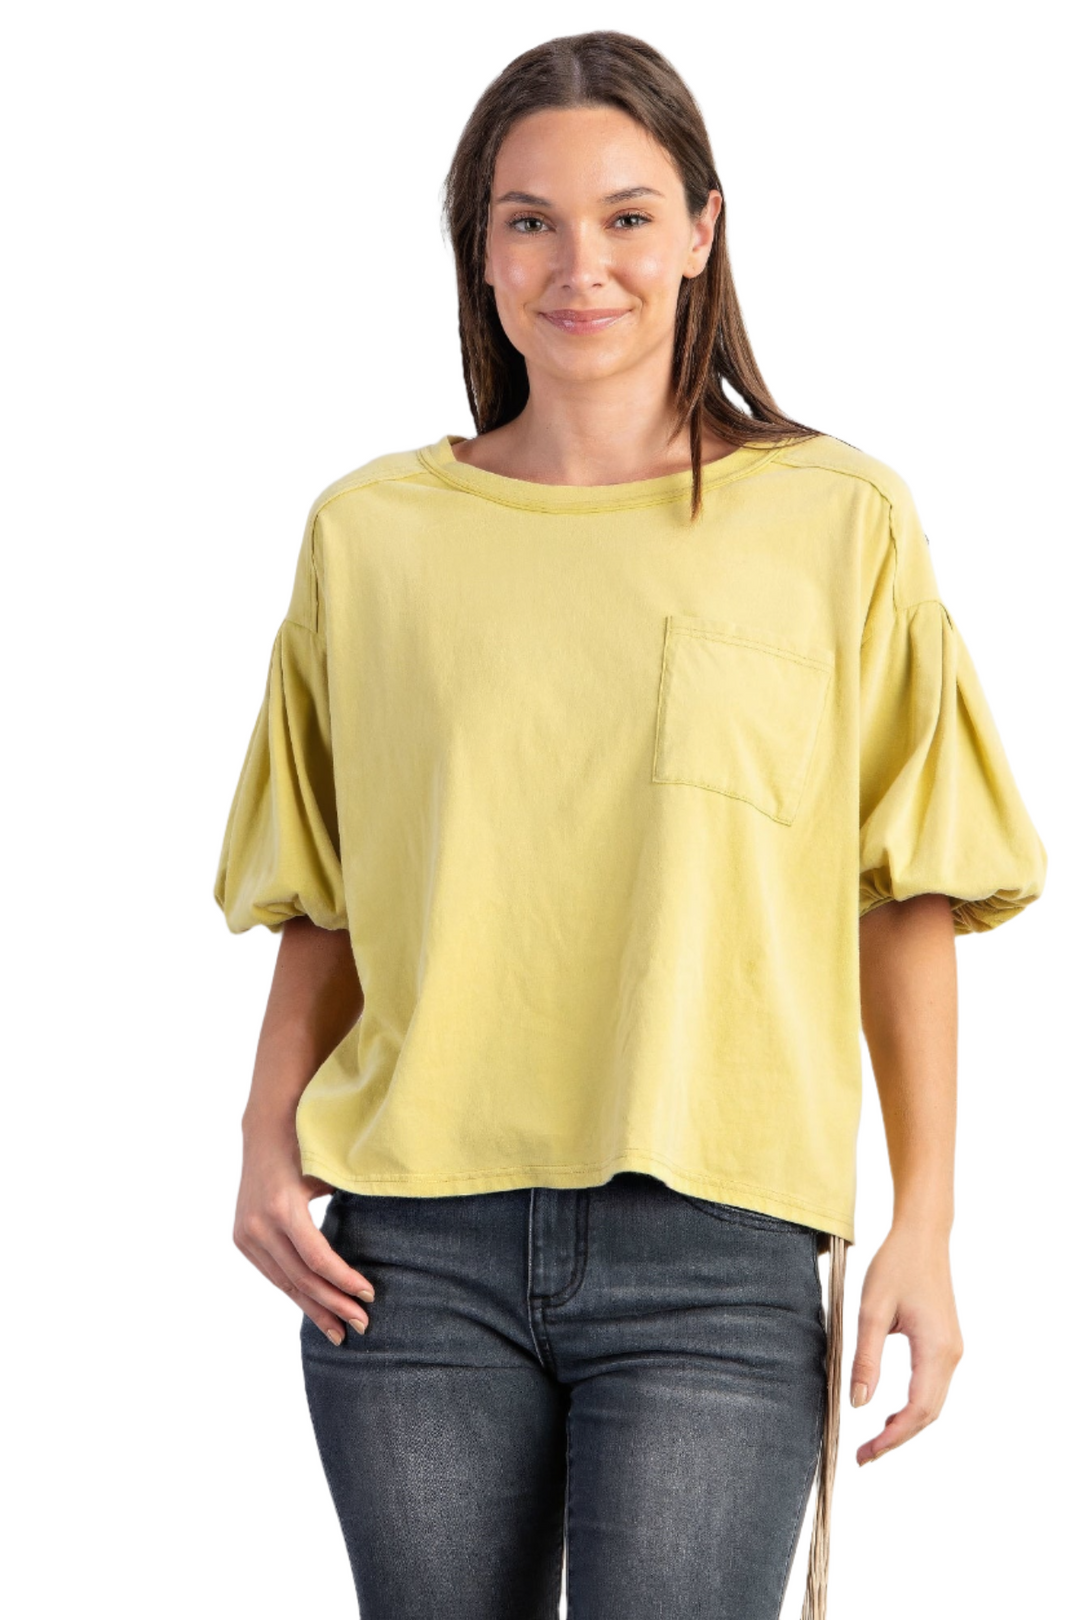 Cotton Jersey Knit Top with Bubble Sleeves & Front Pocket